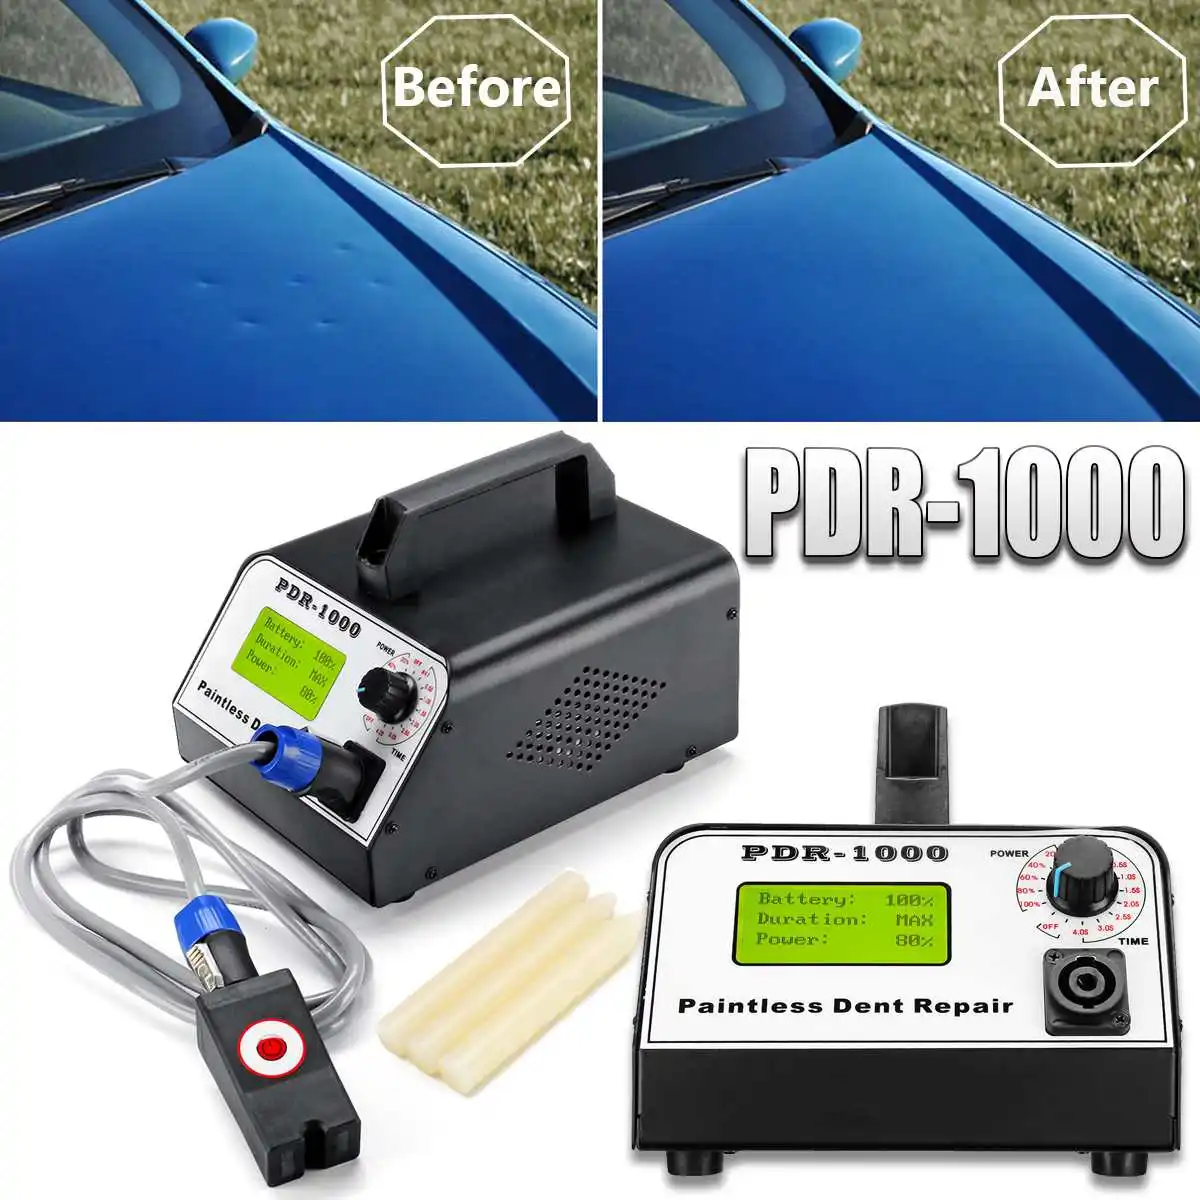 

Car Induction Heater Paintless Dent Repair Remover for Removing Dents 220V/110V 1000W for Car Body Repair Sheet Metal Tool Sets